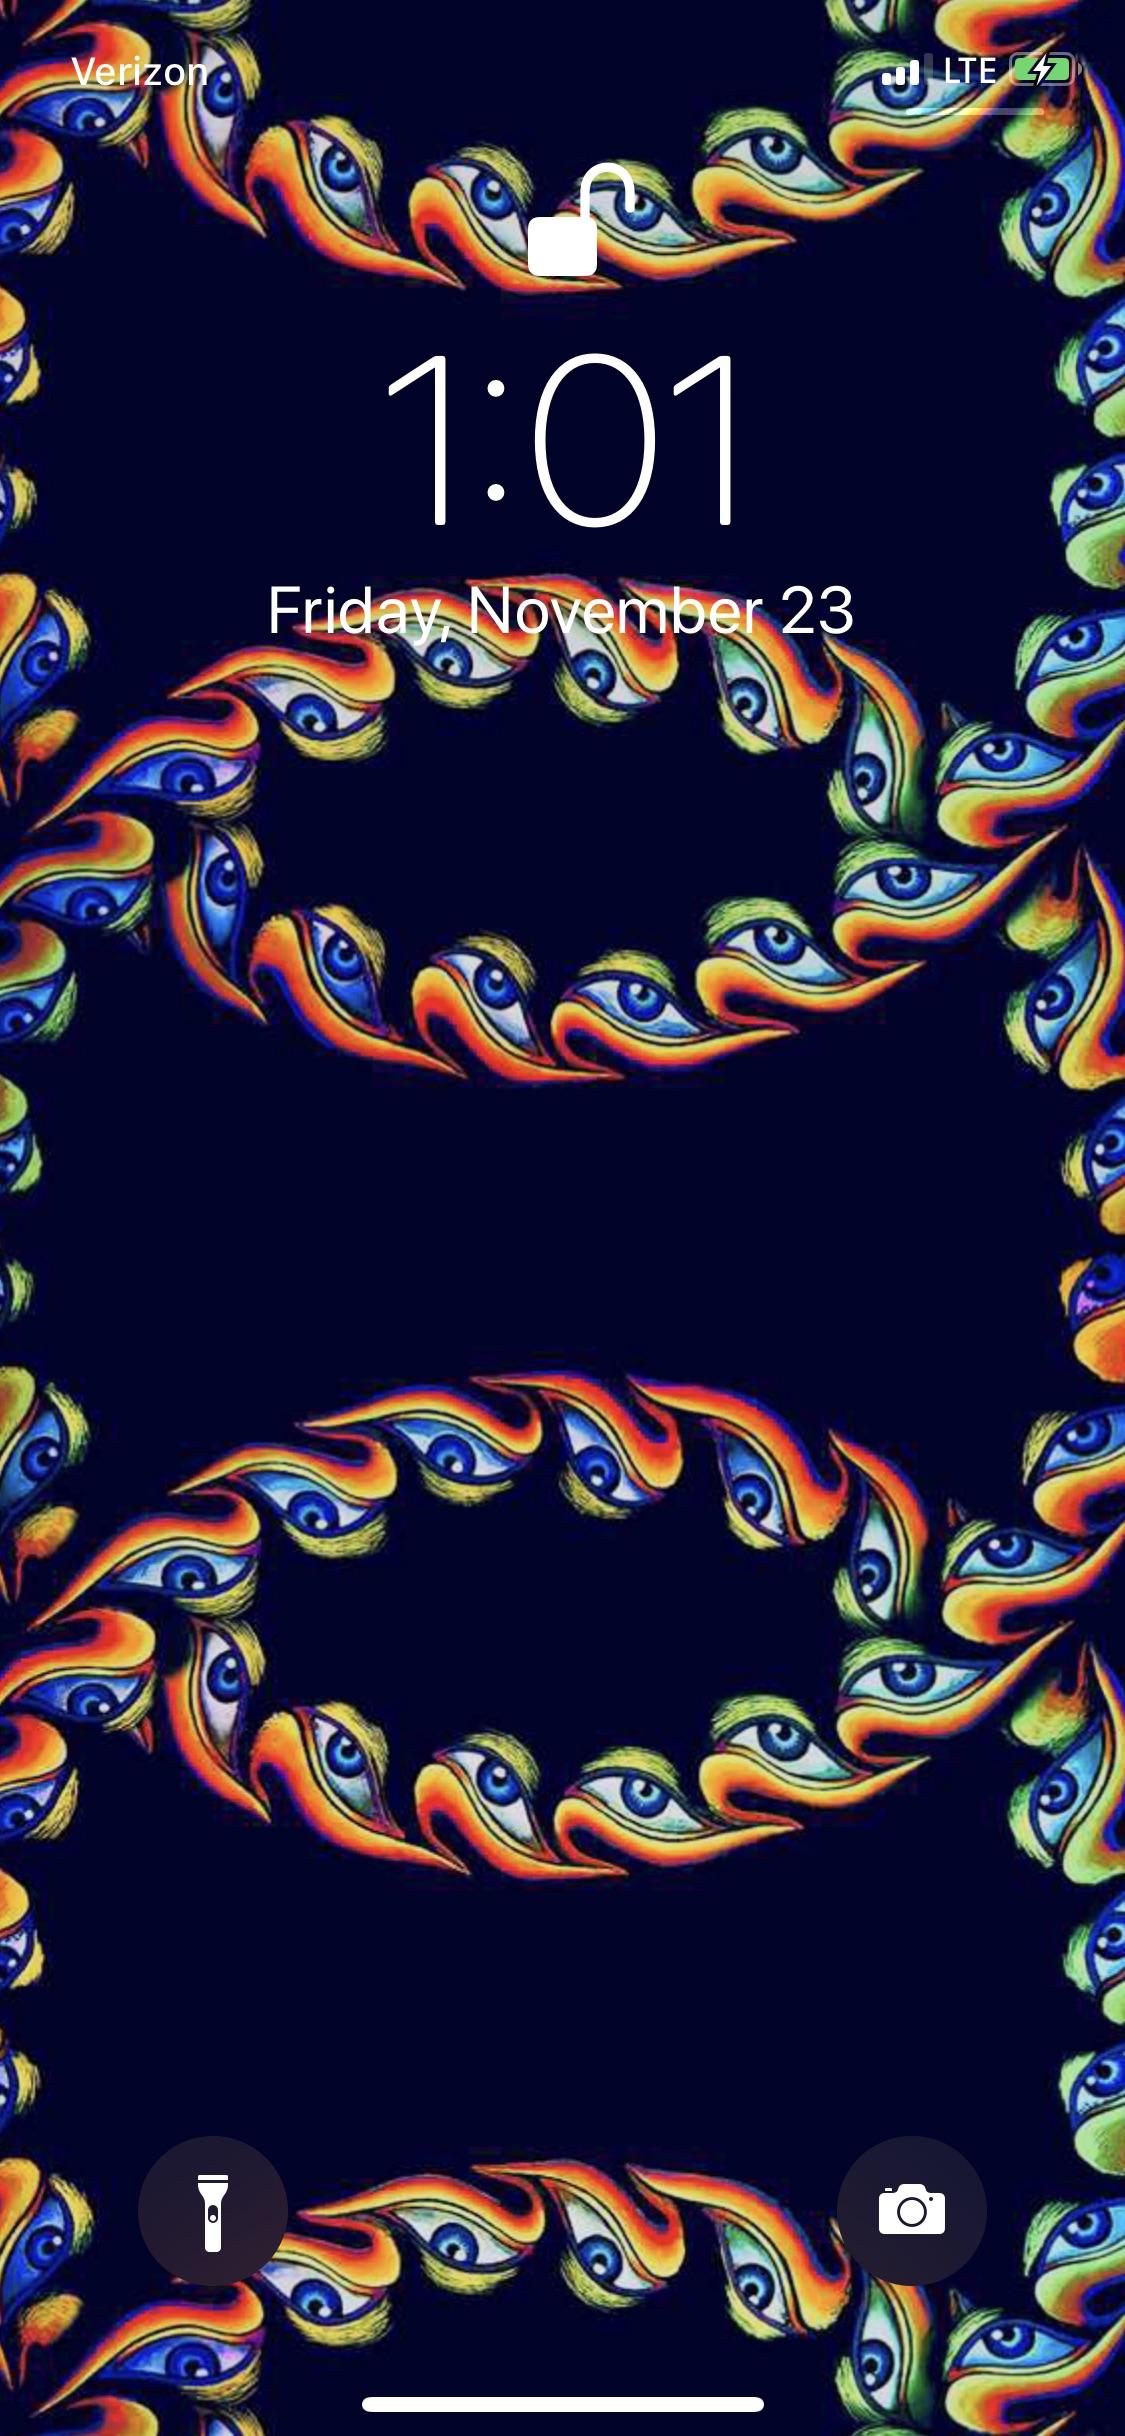 Check Out This Lateralus Wallpaper I Found While Mindlessly